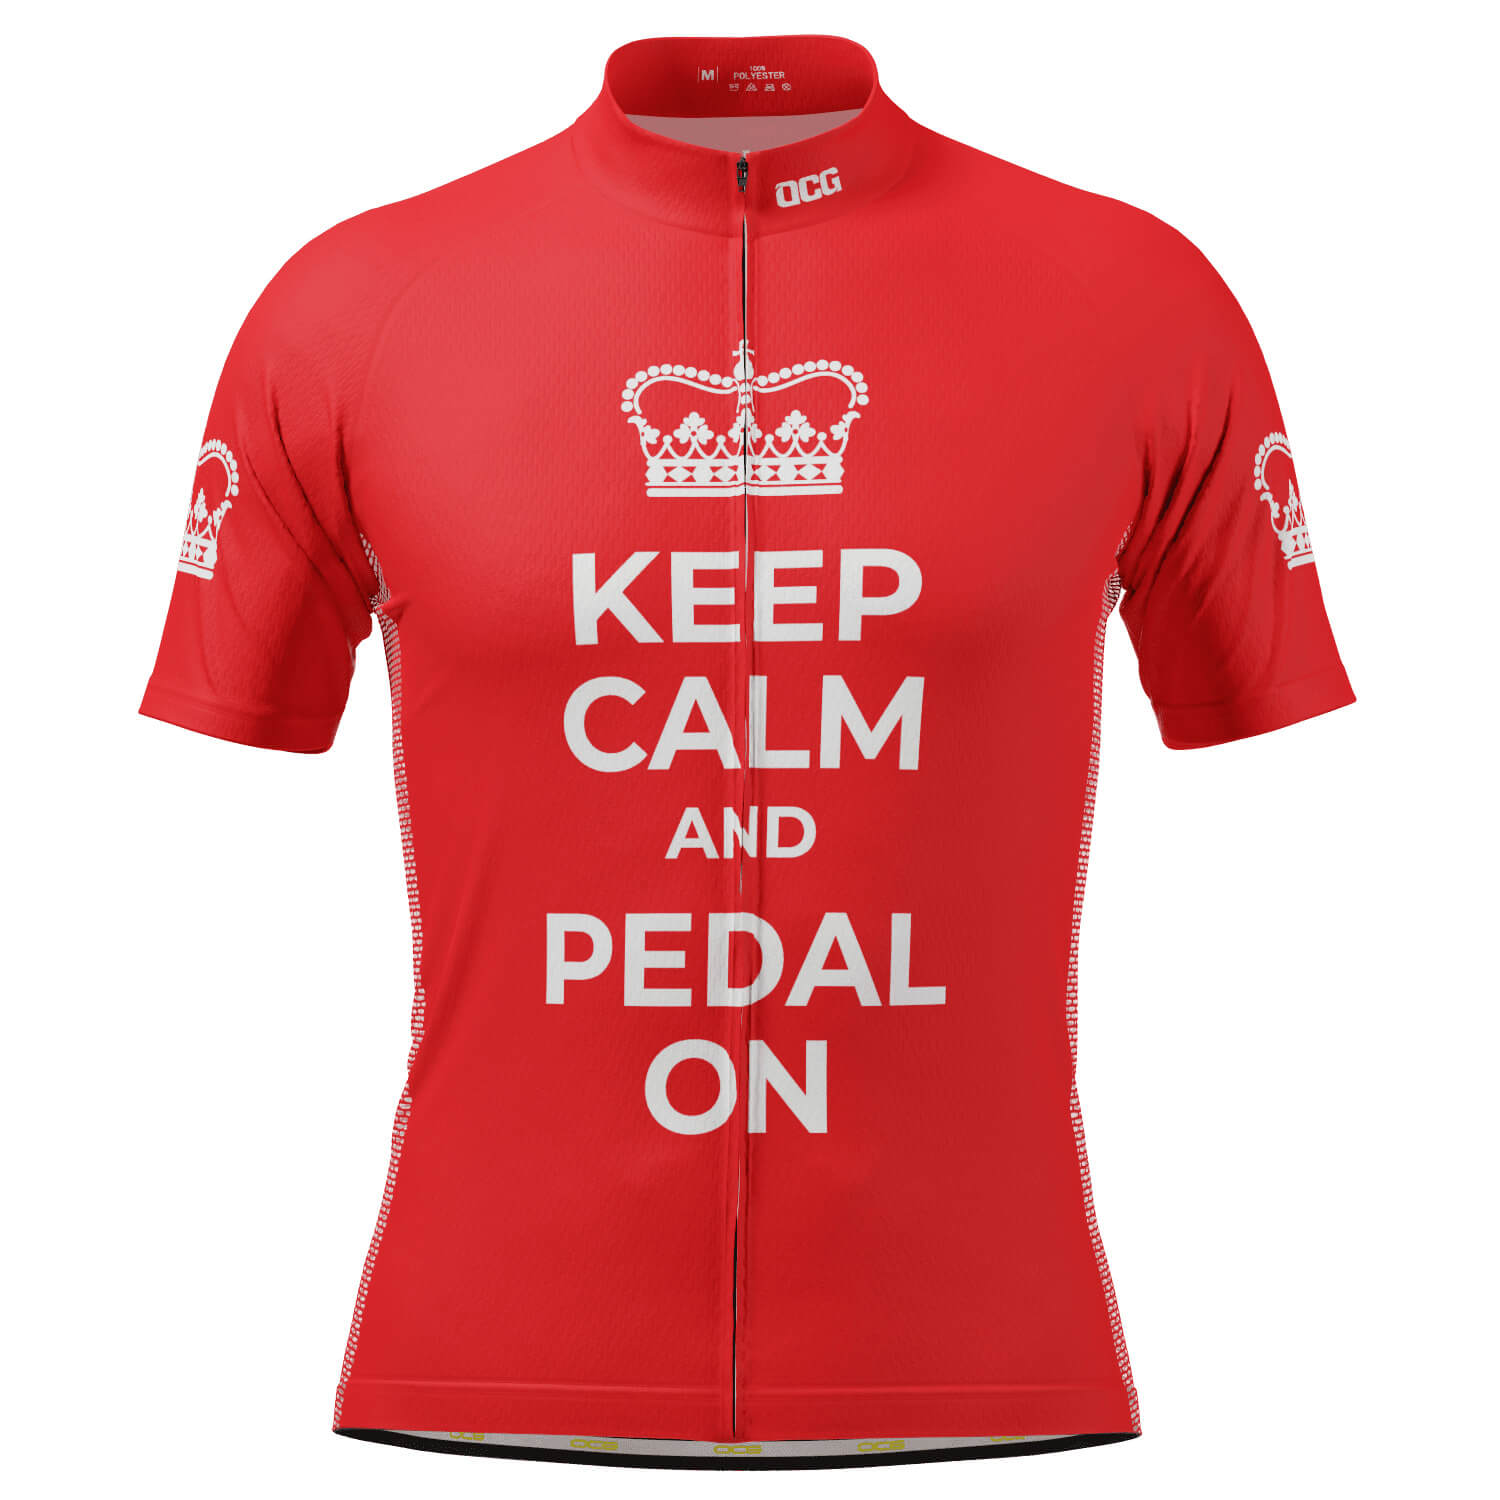 Men's Keep Calm and Pedal On Short Sleeve Cycling Jersey